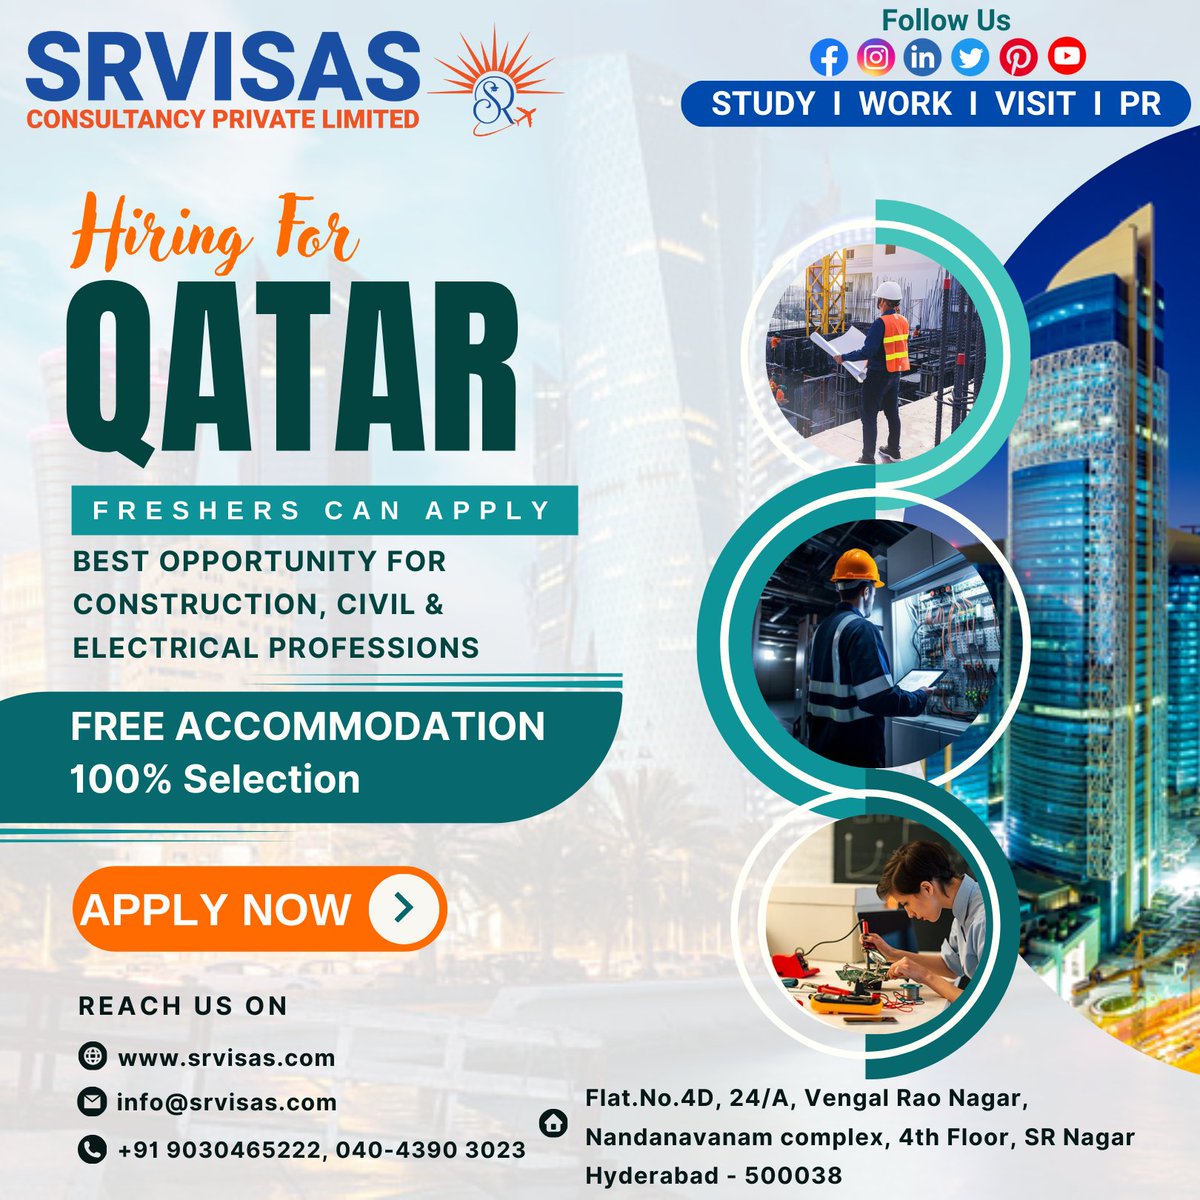 Hiring For Qatar. Best Opportunity for Construction, Civil & Electrical Professions. Free Accommodation. 100% Selection.
#WorkVisa #CareerGoals #VisaService #WorkAbroad #ImmigrationServices #VisaAssistance #VisaExpert #VisaConsultation #VisaApplication #WorkVisa #VisaProcess